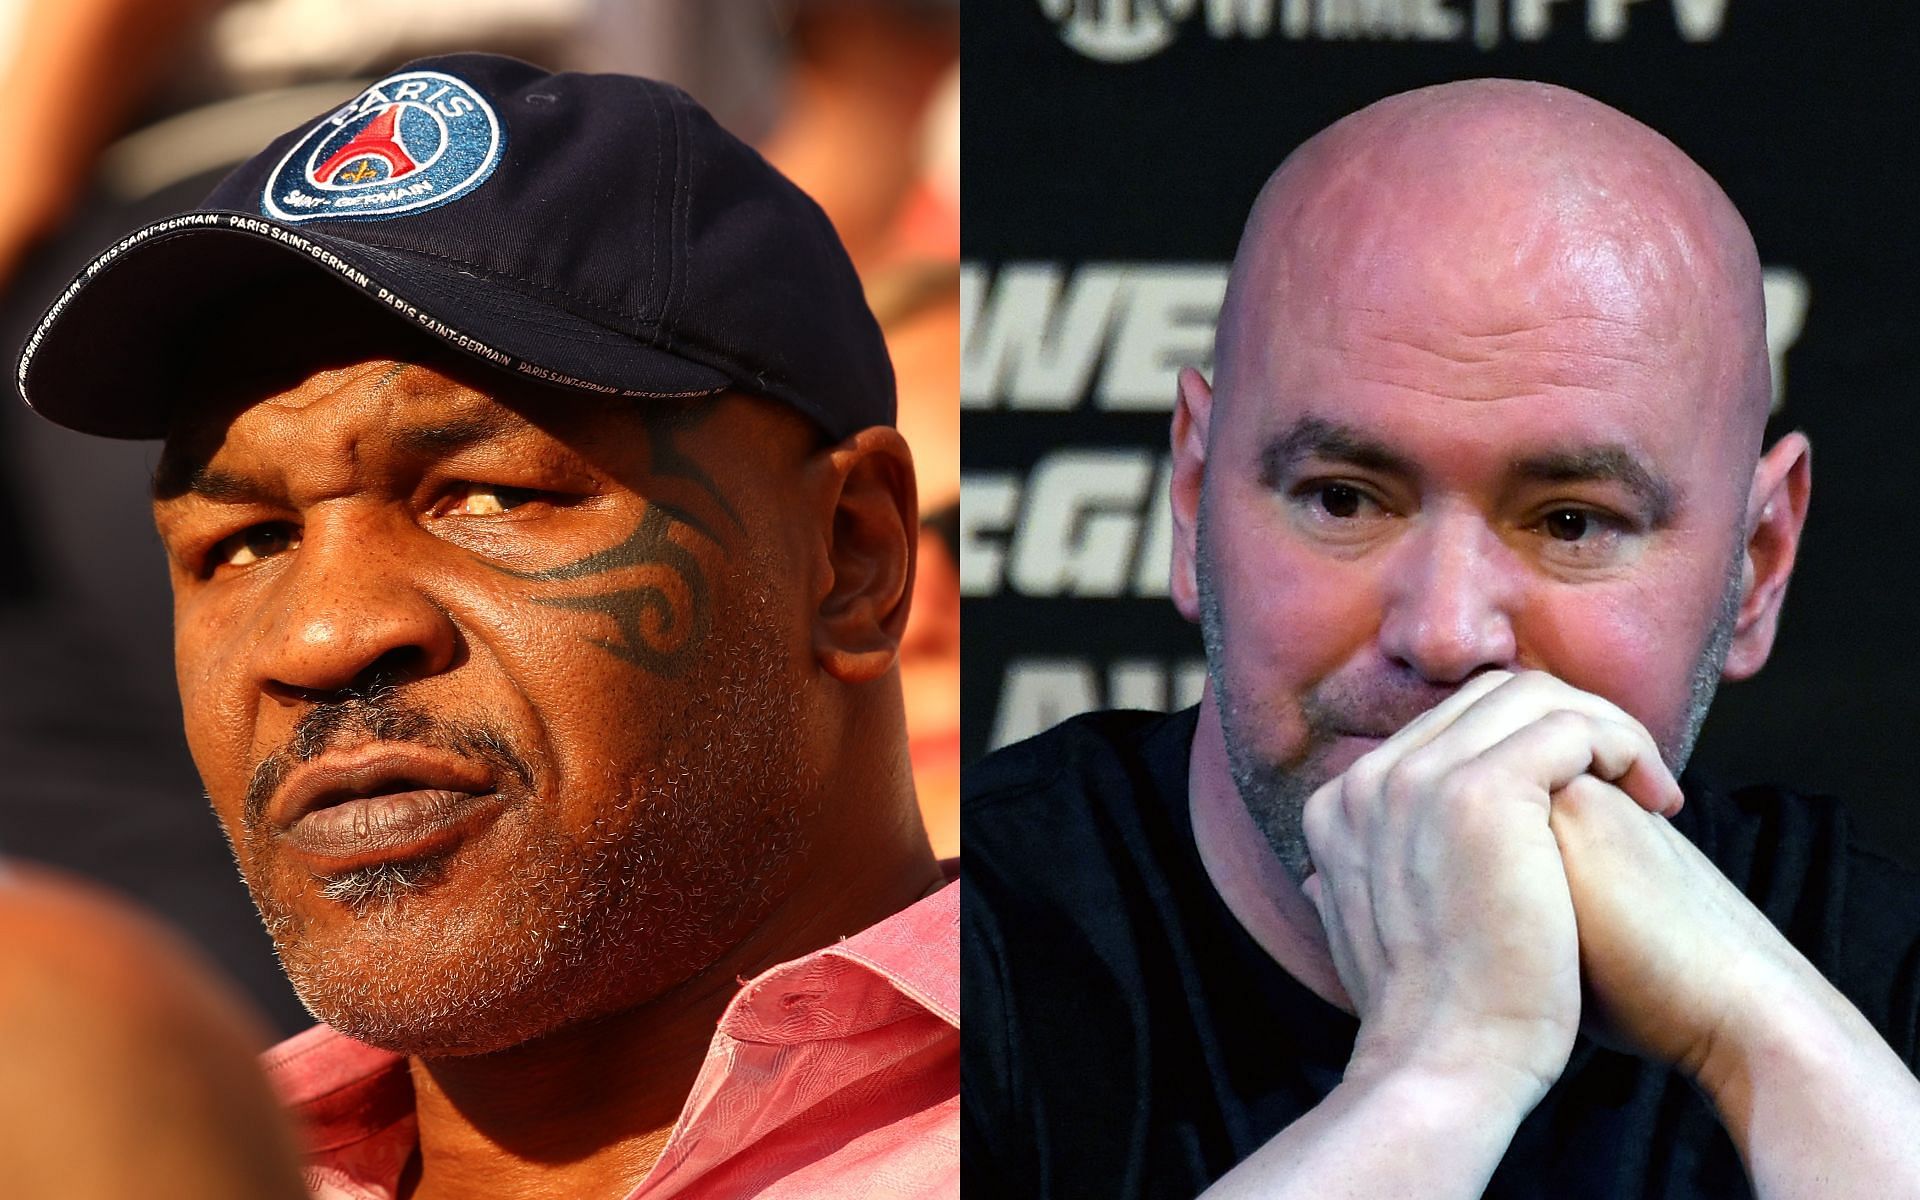 Mike Tyson (left) and Dana White (right) (Images via Getty)